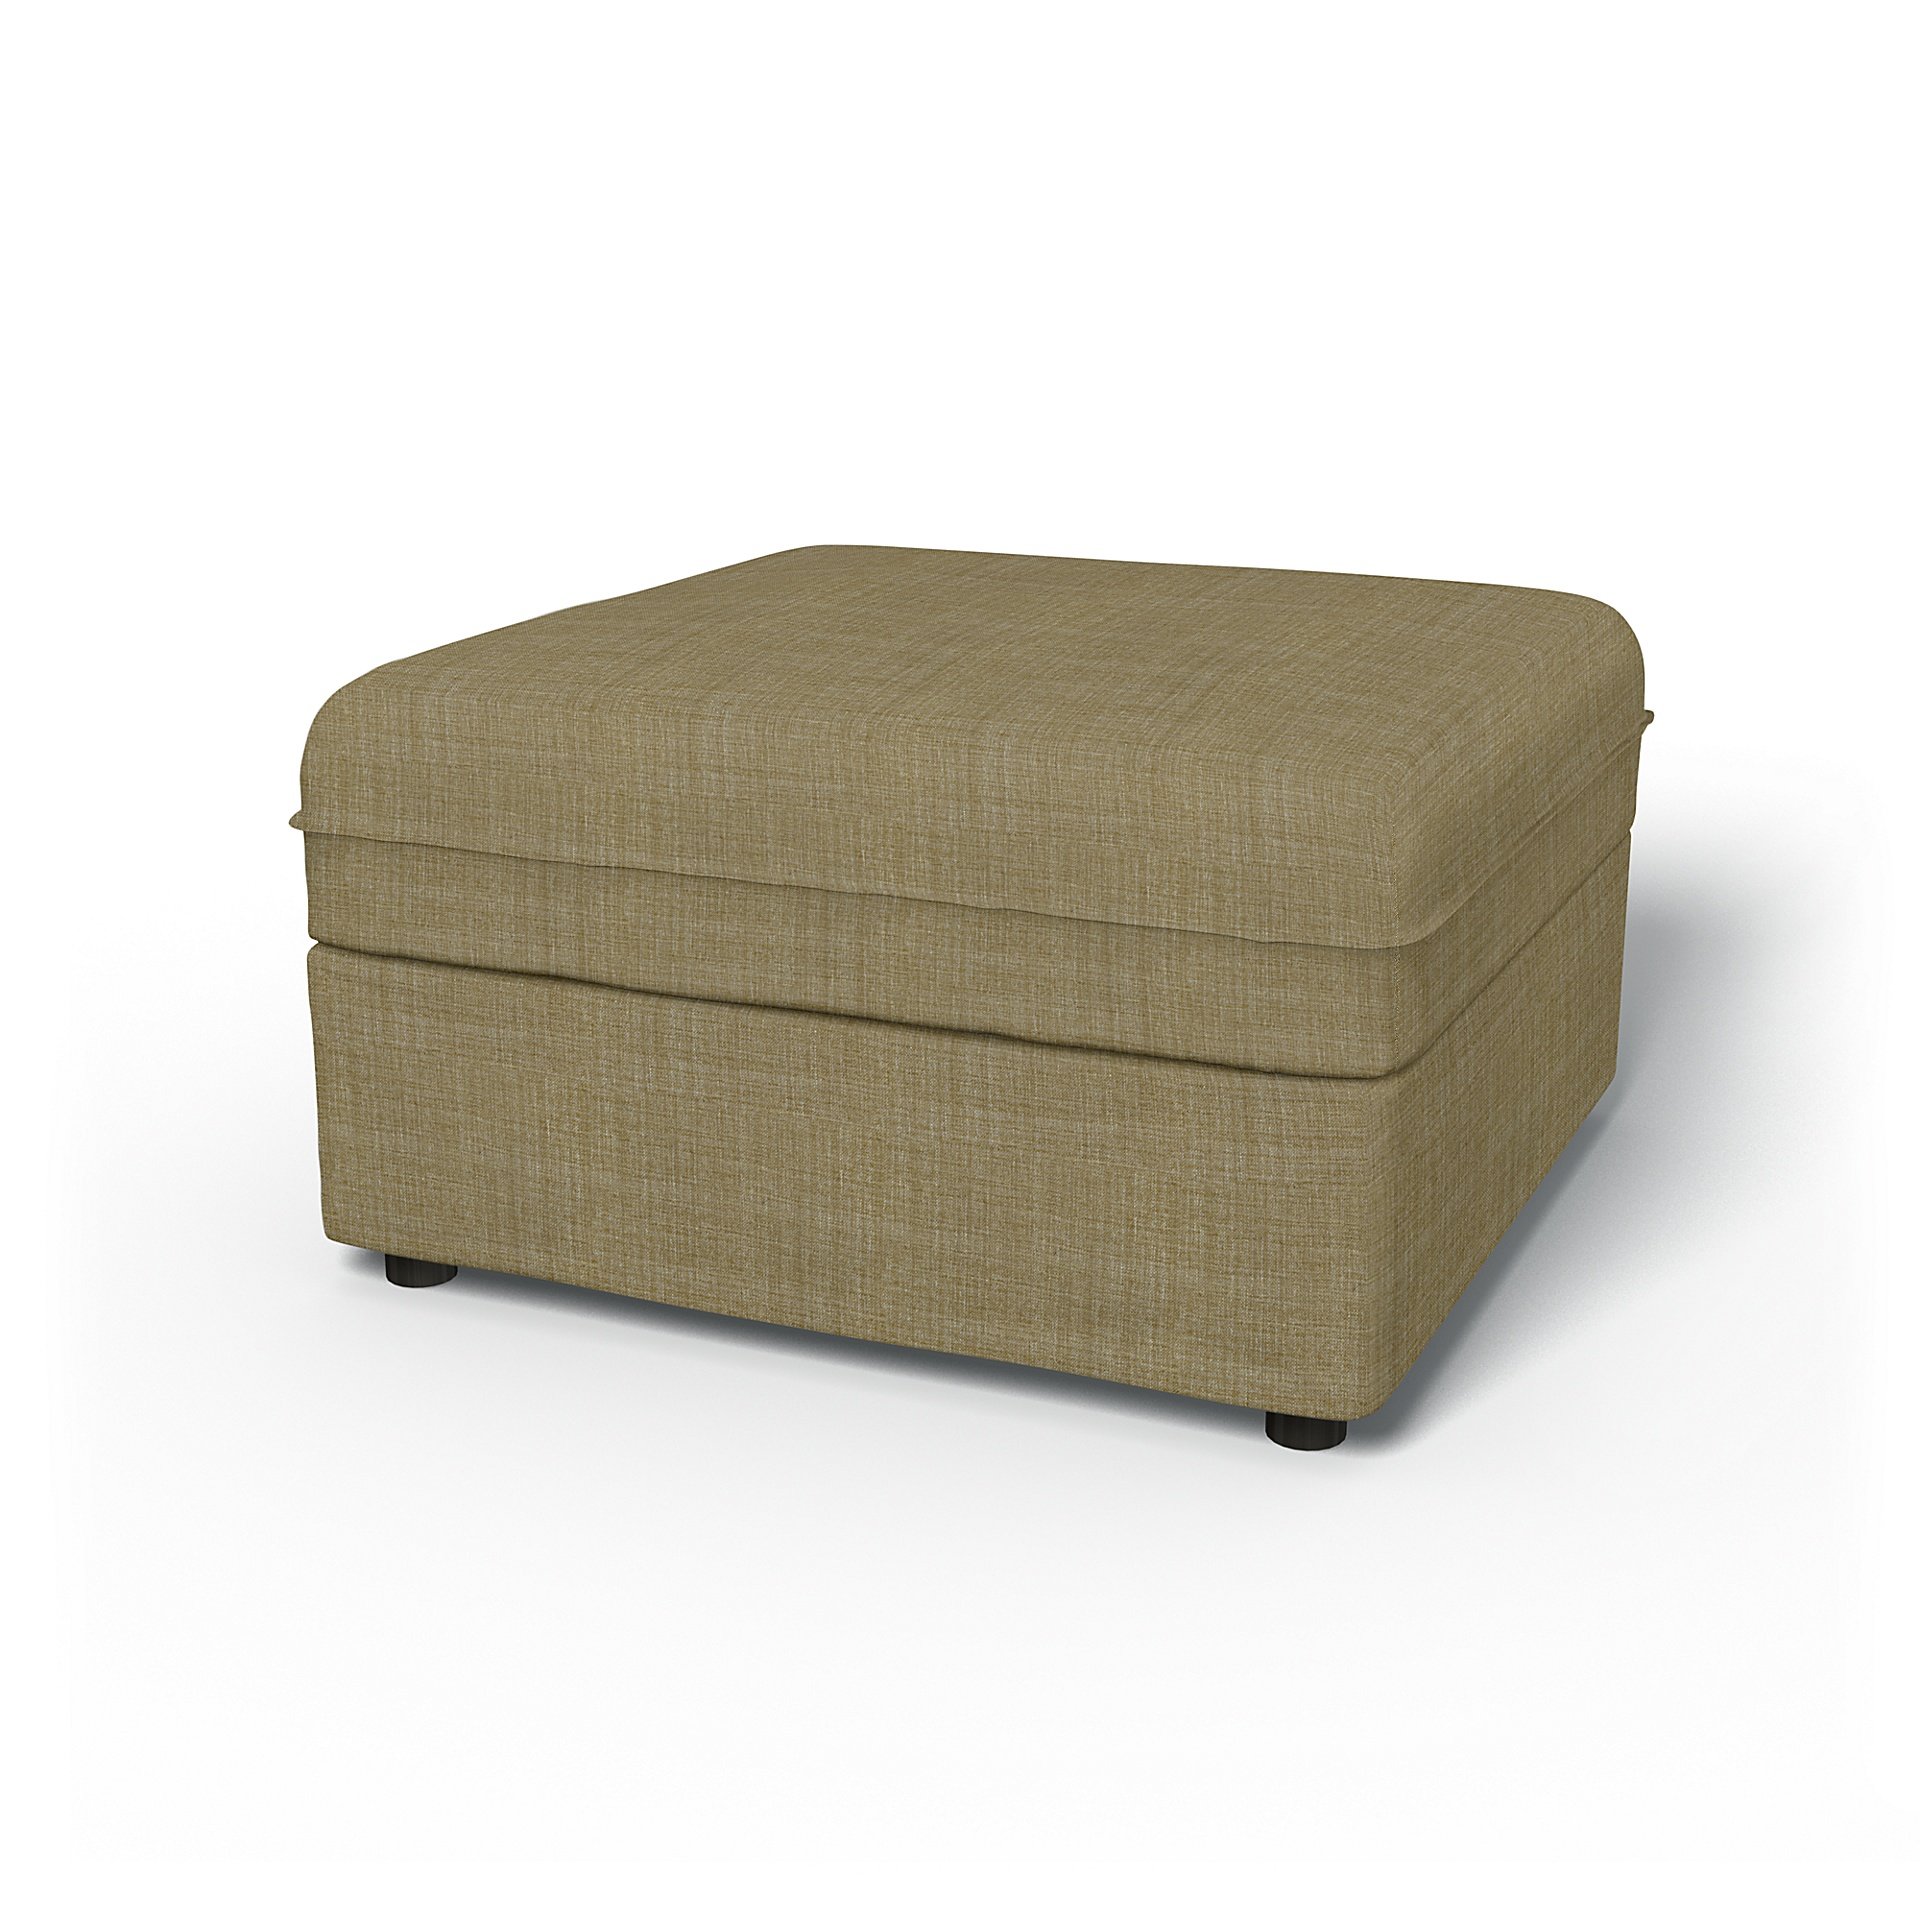 IKEA - Vallentuna Seat Module with Storage Cover 80x80cm 32x32in, Dusty Yellow, Boucle & Texture - B